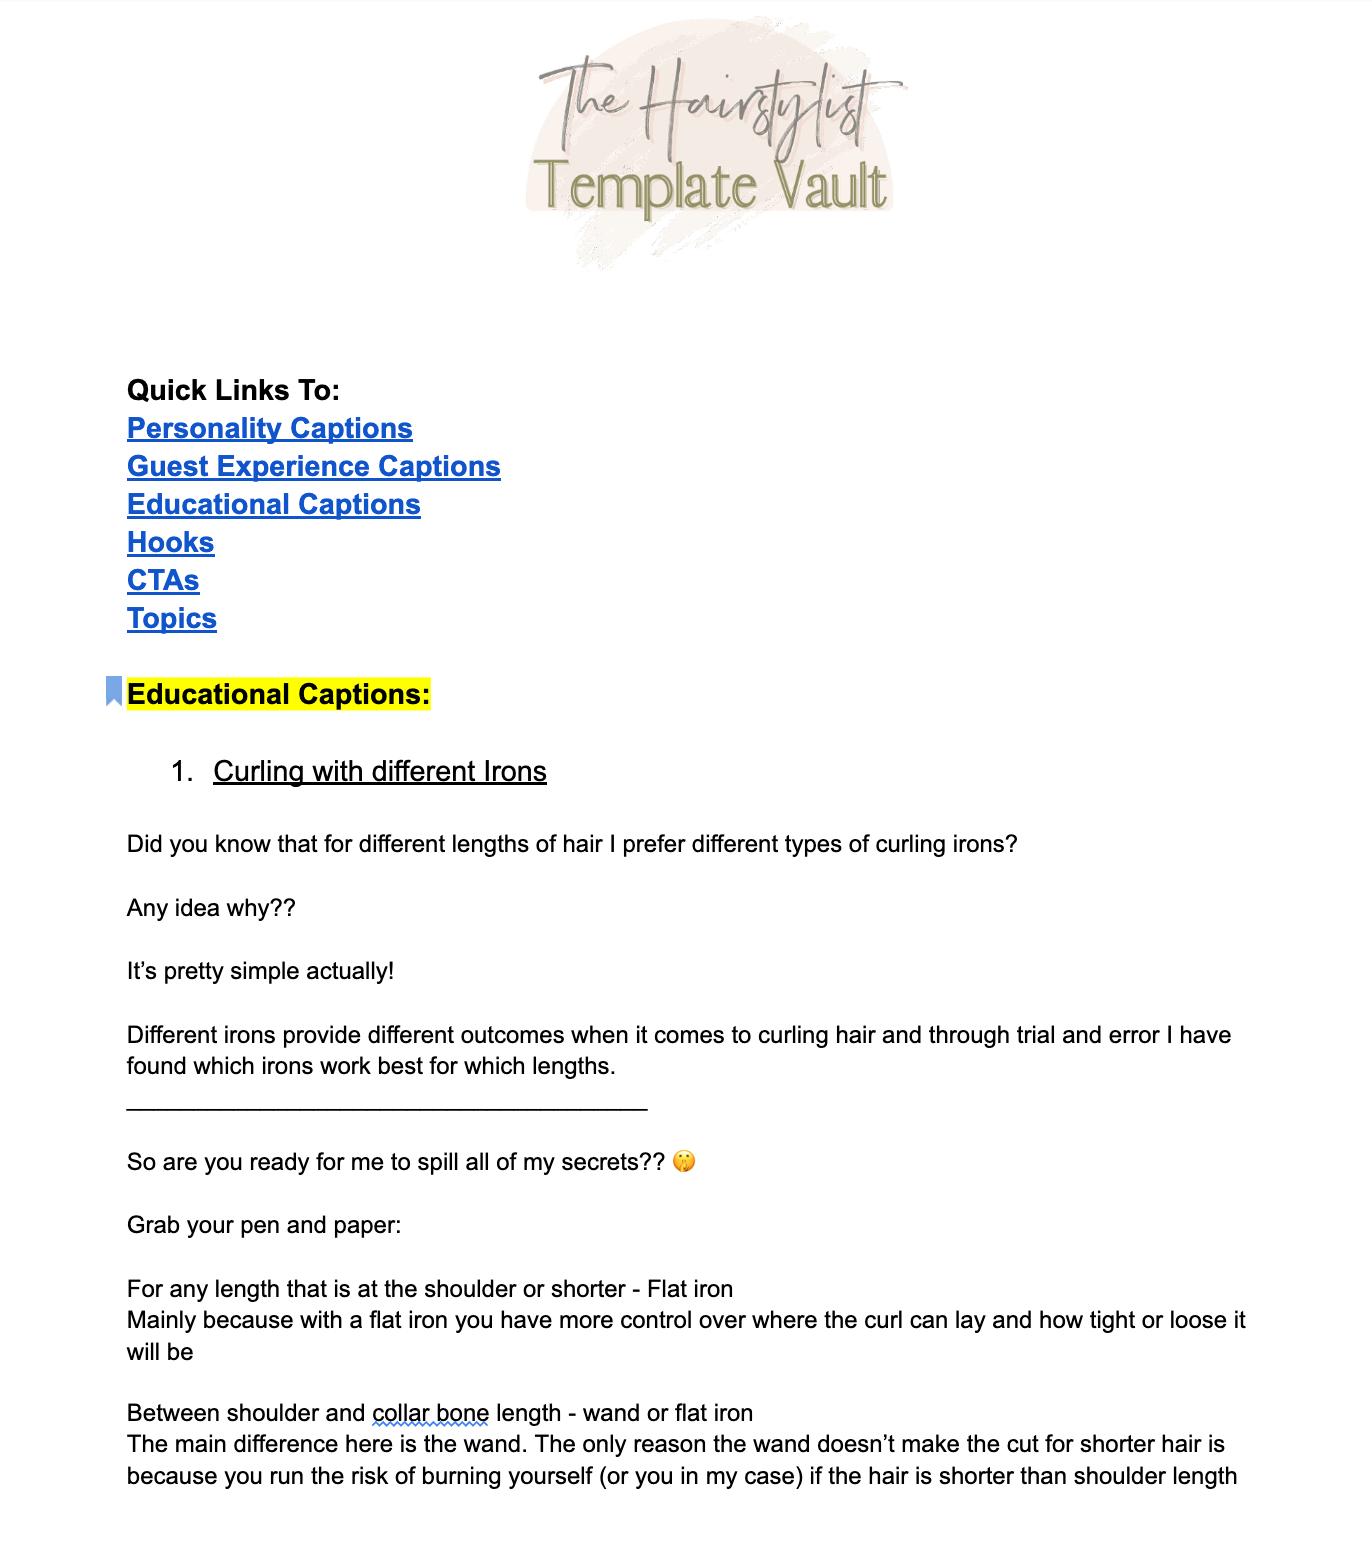 Caption Template Pack